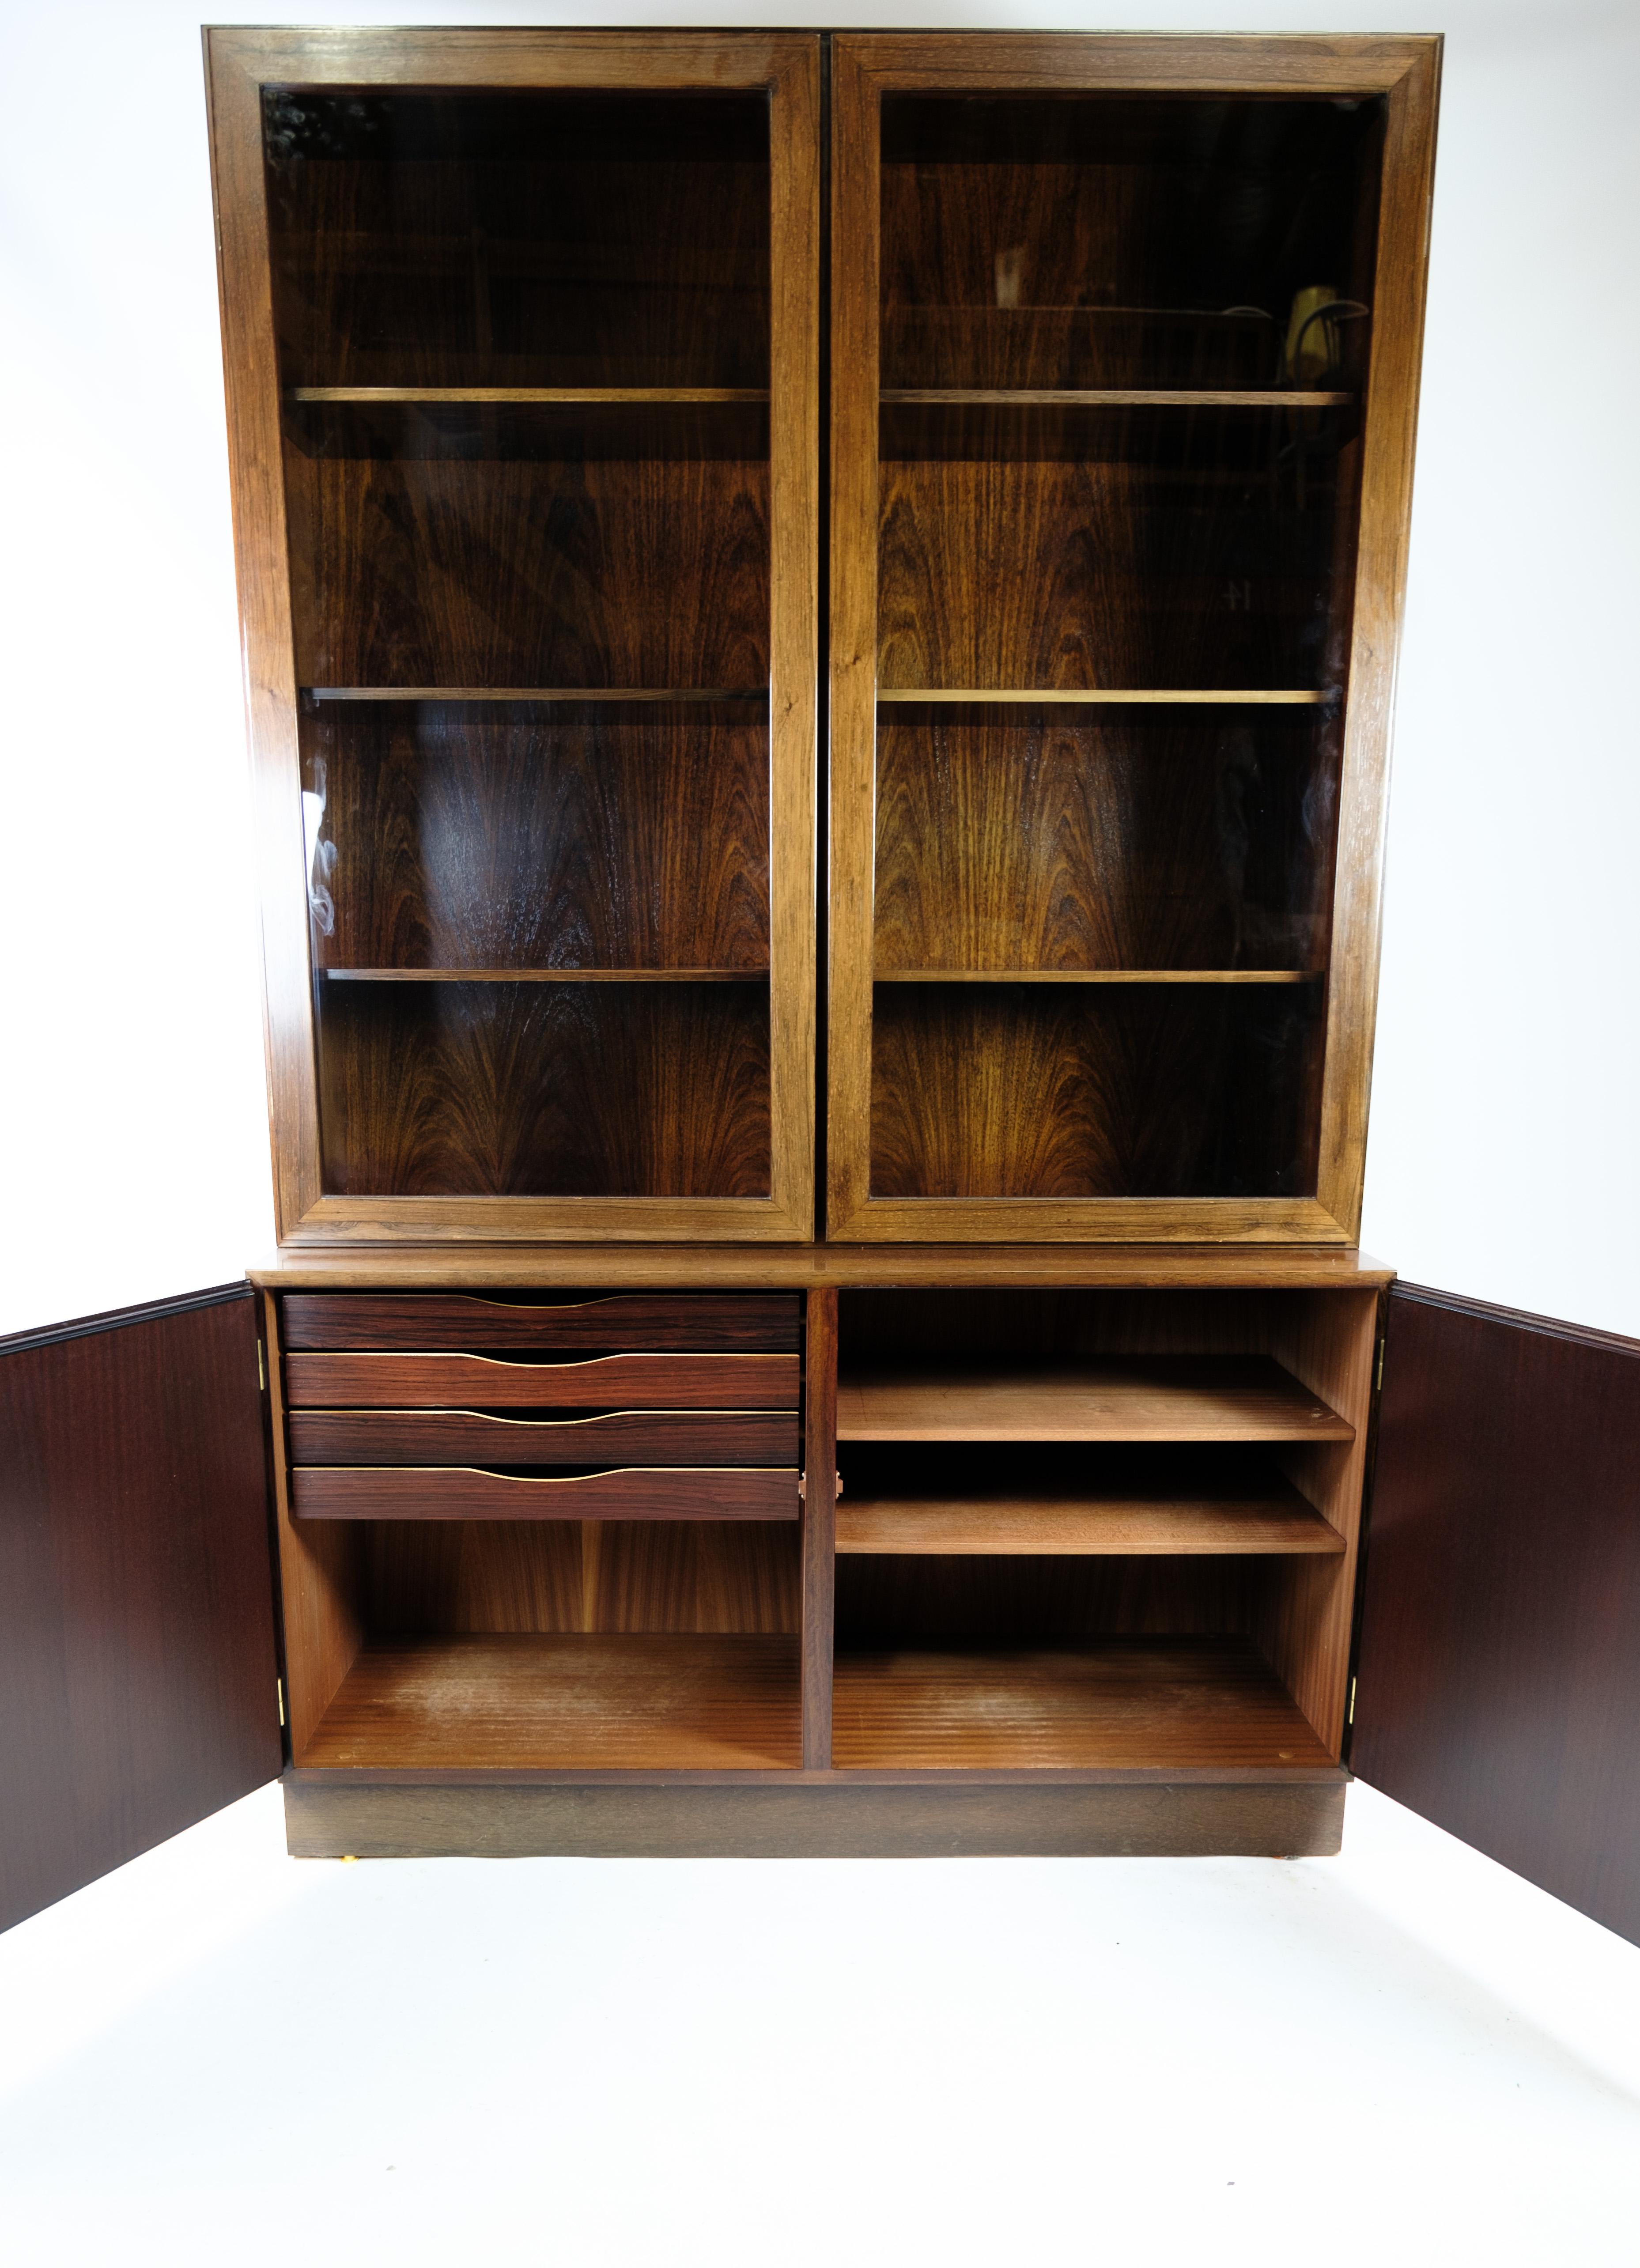 Get a piece of Danish furniture history with this beautiful glass showcase, designed by Omann Junior in rosewood in the 1960s and manufactured at Omann Junior's Møbelfabrik. This display case consists of a lower section with two doors and a glass